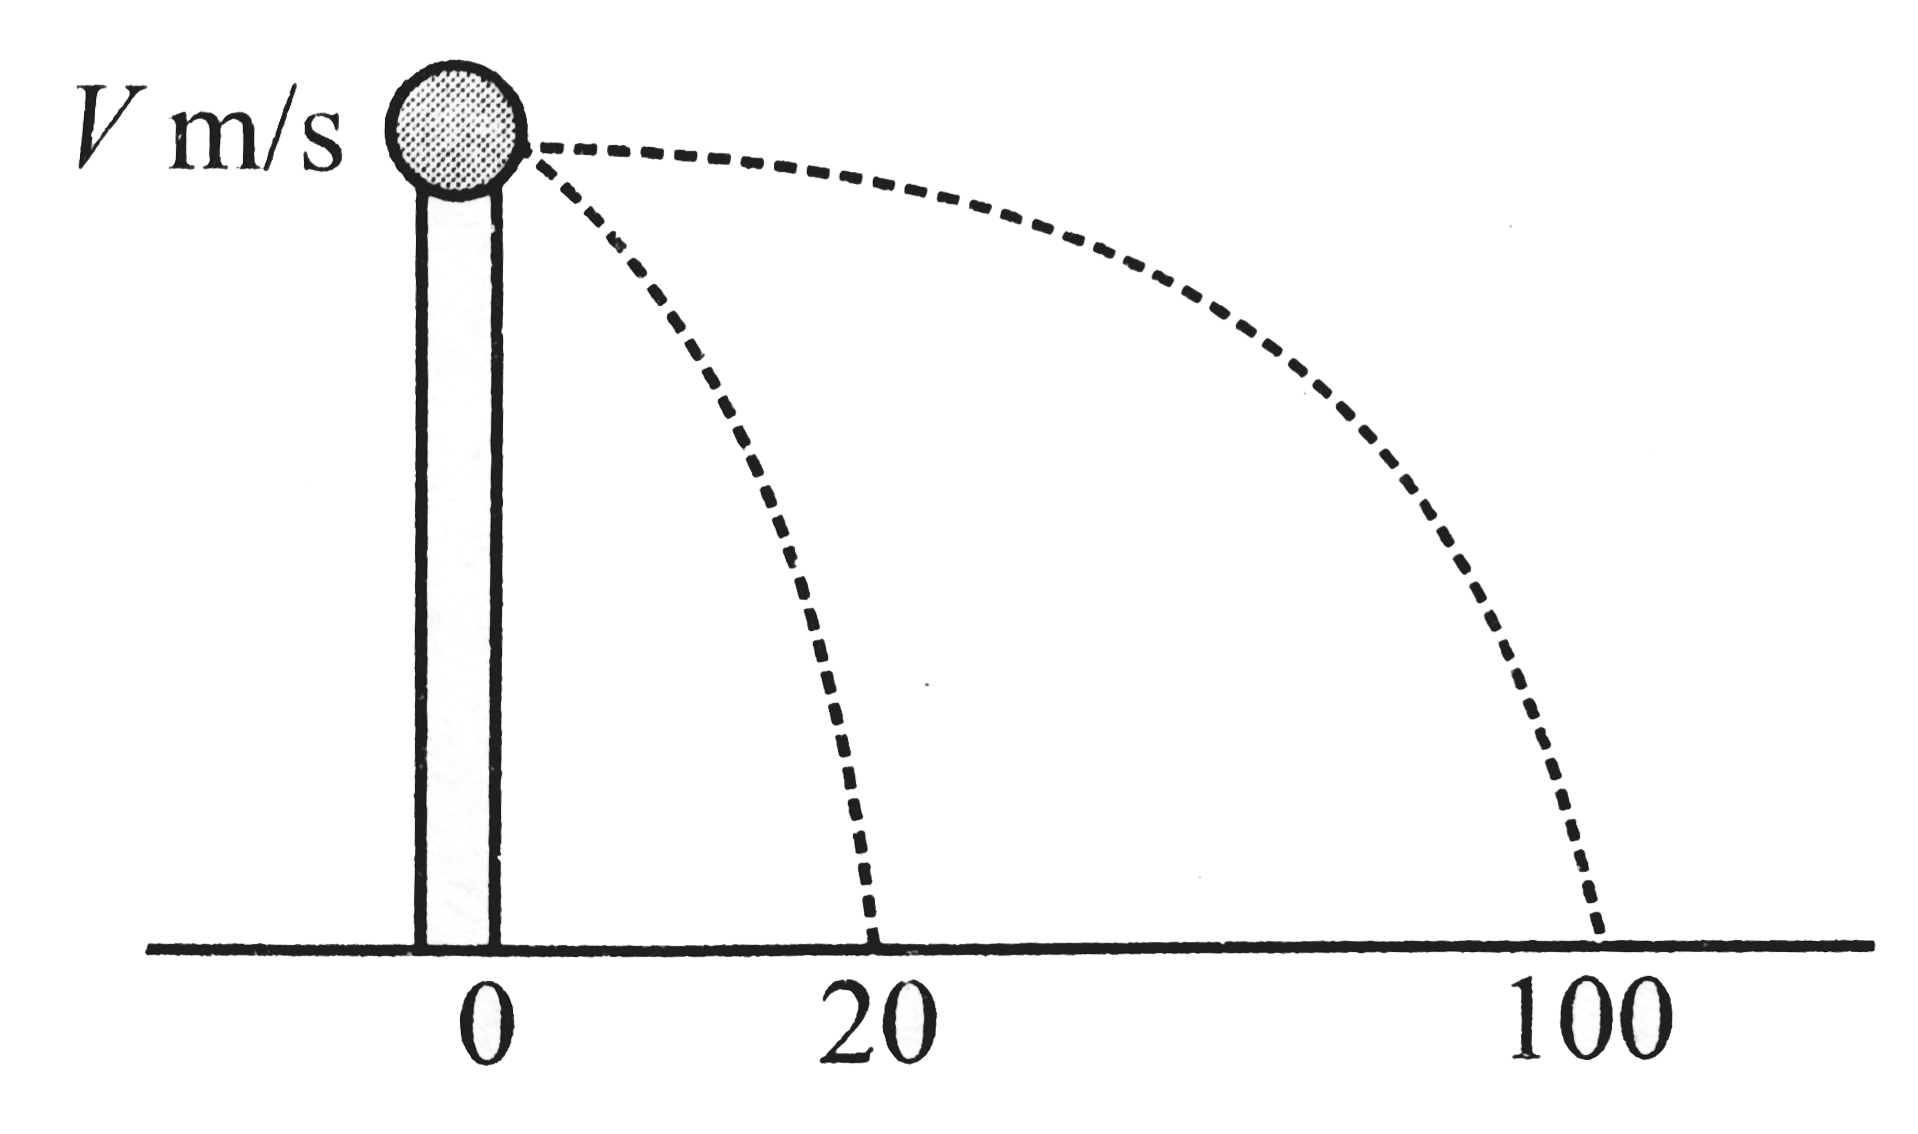 A ball of mass 0.2 kg rests on a vertical post of height 5 m. A bullet of mass 0.01 kg, travelling with a velocity V m//sin a horizontal direction, hits the centre of the ball.   After the collision. the ball and the bullet travel independently. The ball hits the ground at a distance of 20 m and the bullet at a distance of 100 m from the foot of the post. The initial velocity V of the bullet is